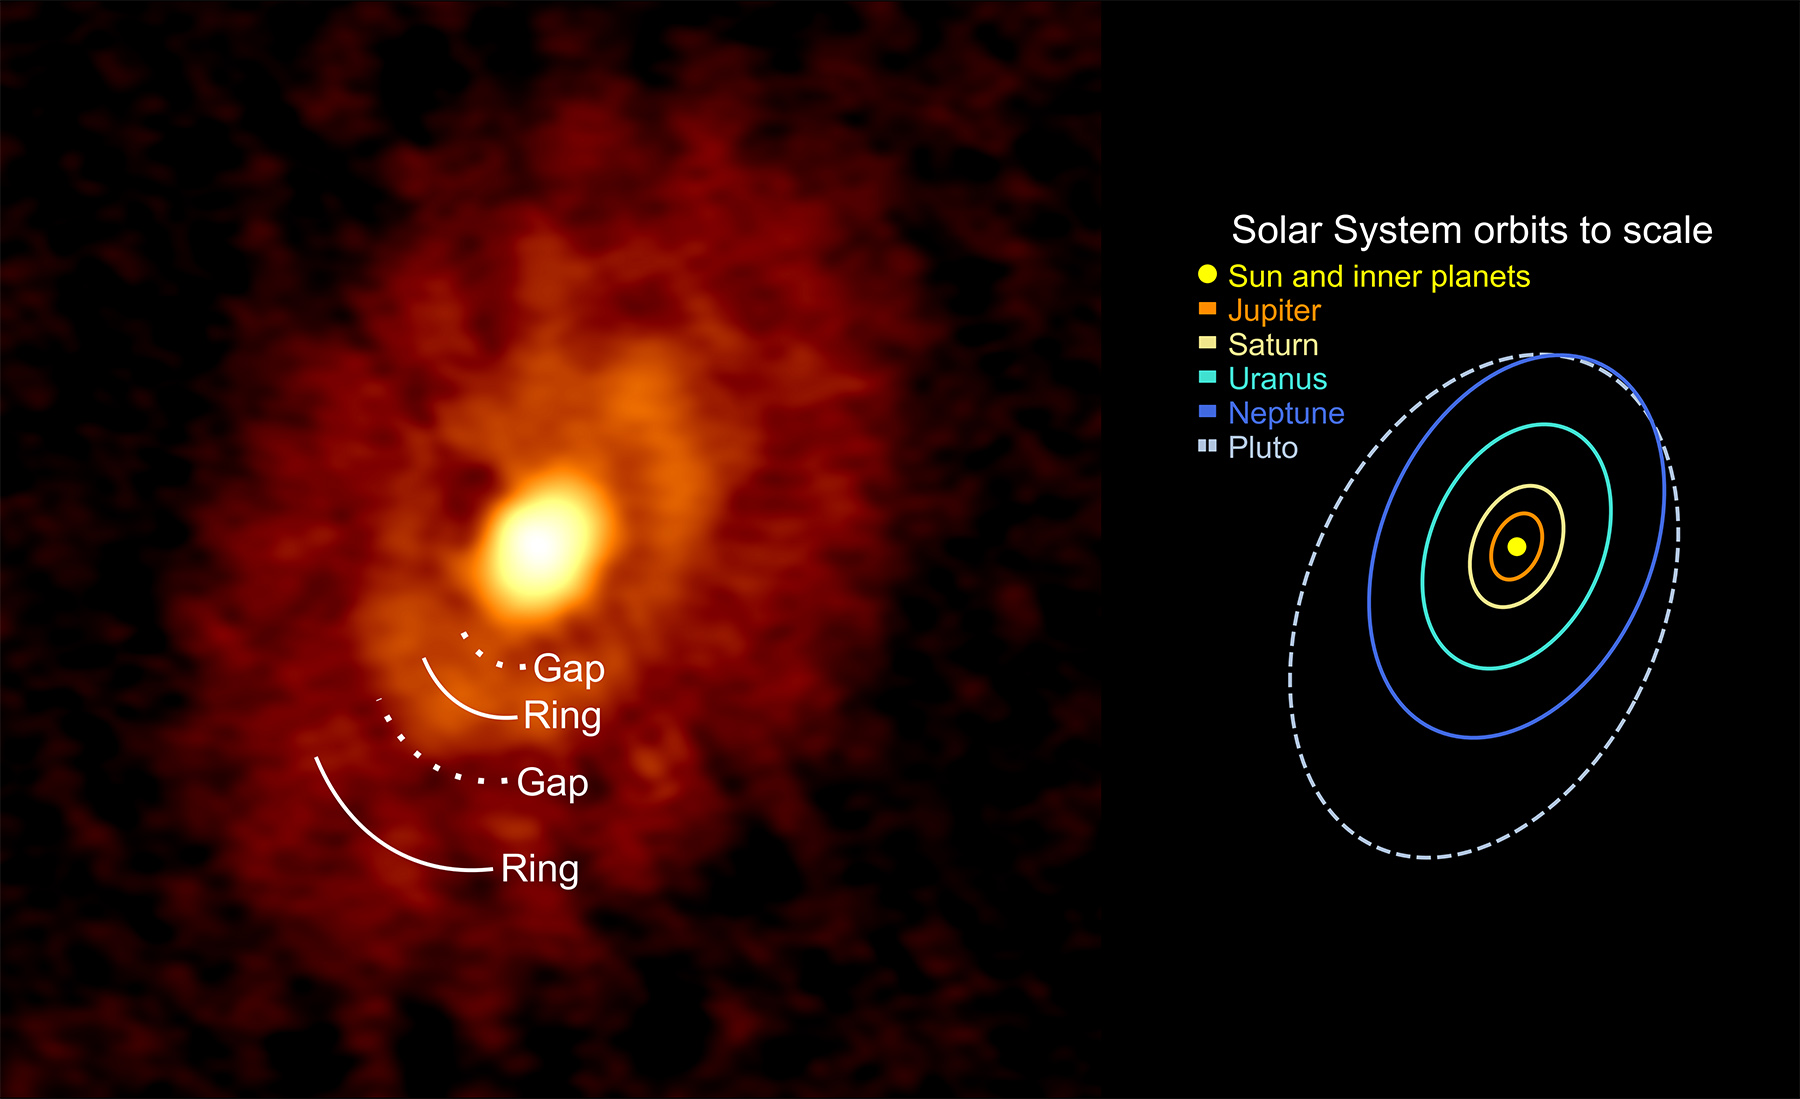 The rings and gaps in the IRS 63 dust disk are shown next to a sketch of the Solar System orbits drawn at the same size scale and orientation of the IRS 63 disk. The locations of the rings are similar to the locations of objects in our own Solar System, with the inner ring about the size of Neptune's orbit and the outer ring a little larger than Pluto's orbit.&nbsp;